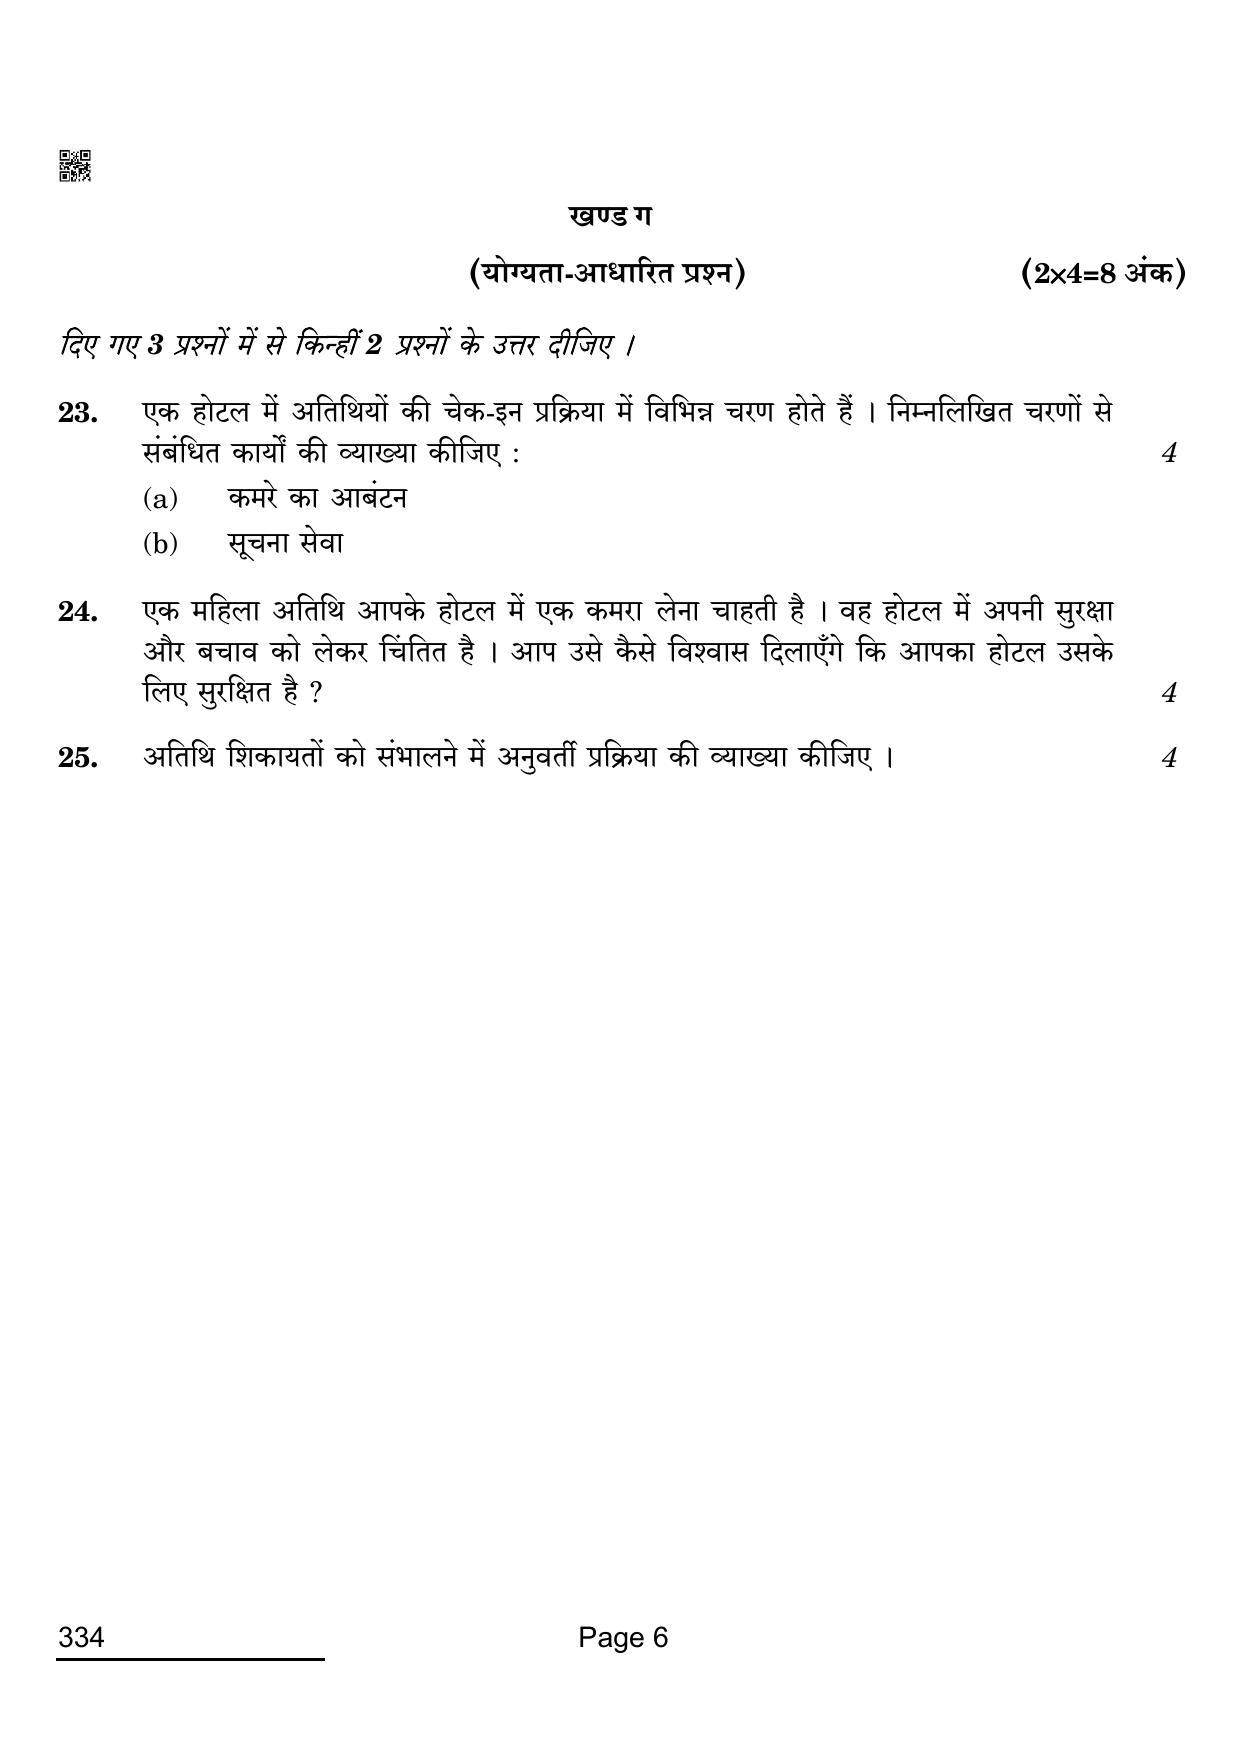 CBSE Class 12 334_Front Office Operations 2022 Question Paper - Page 6